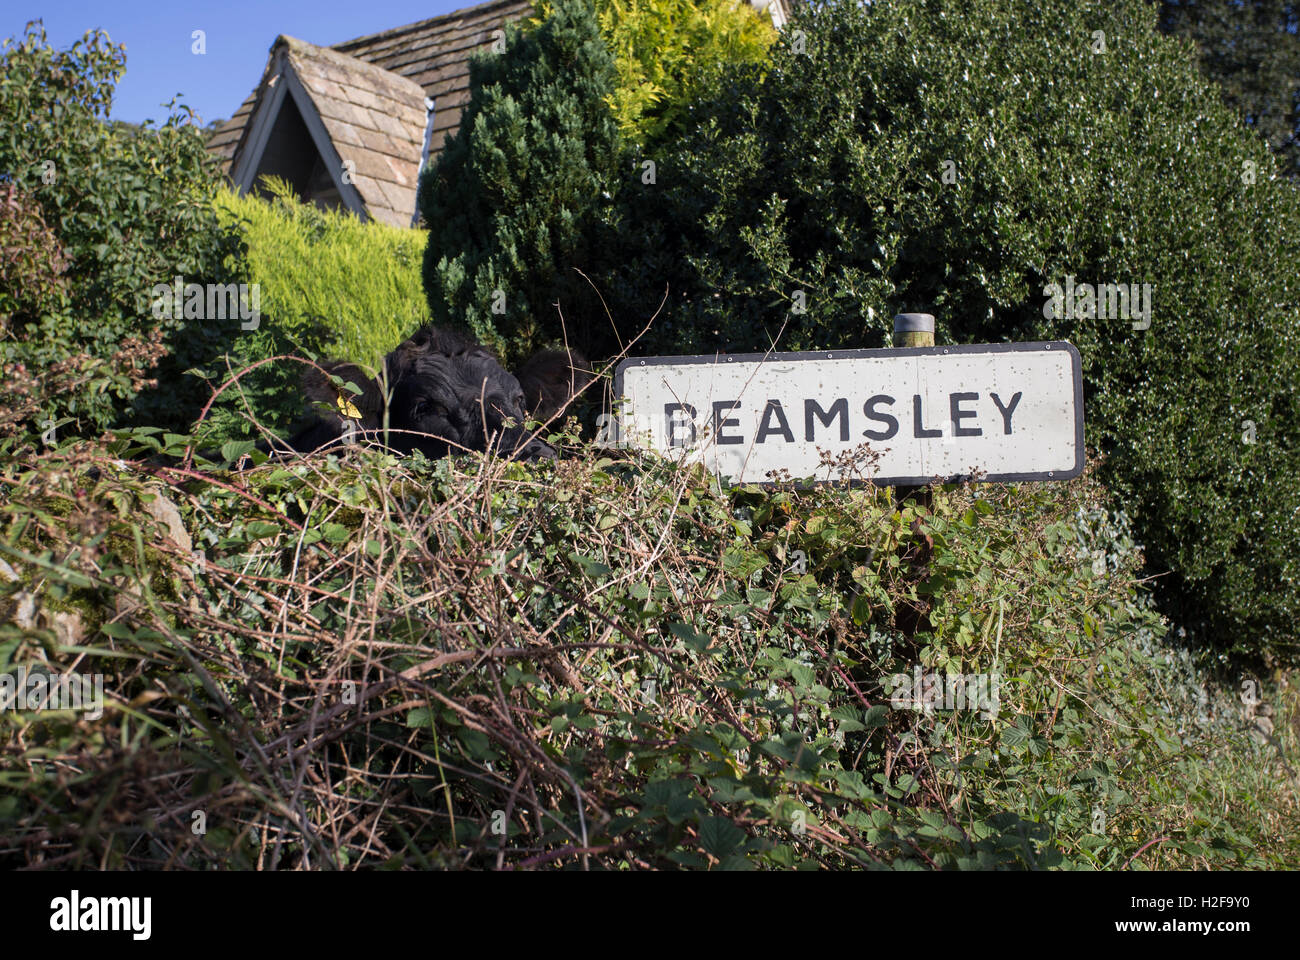 Beamsley.A village in North Yorkshire.A cow is stood next to the sign. Stock Photo